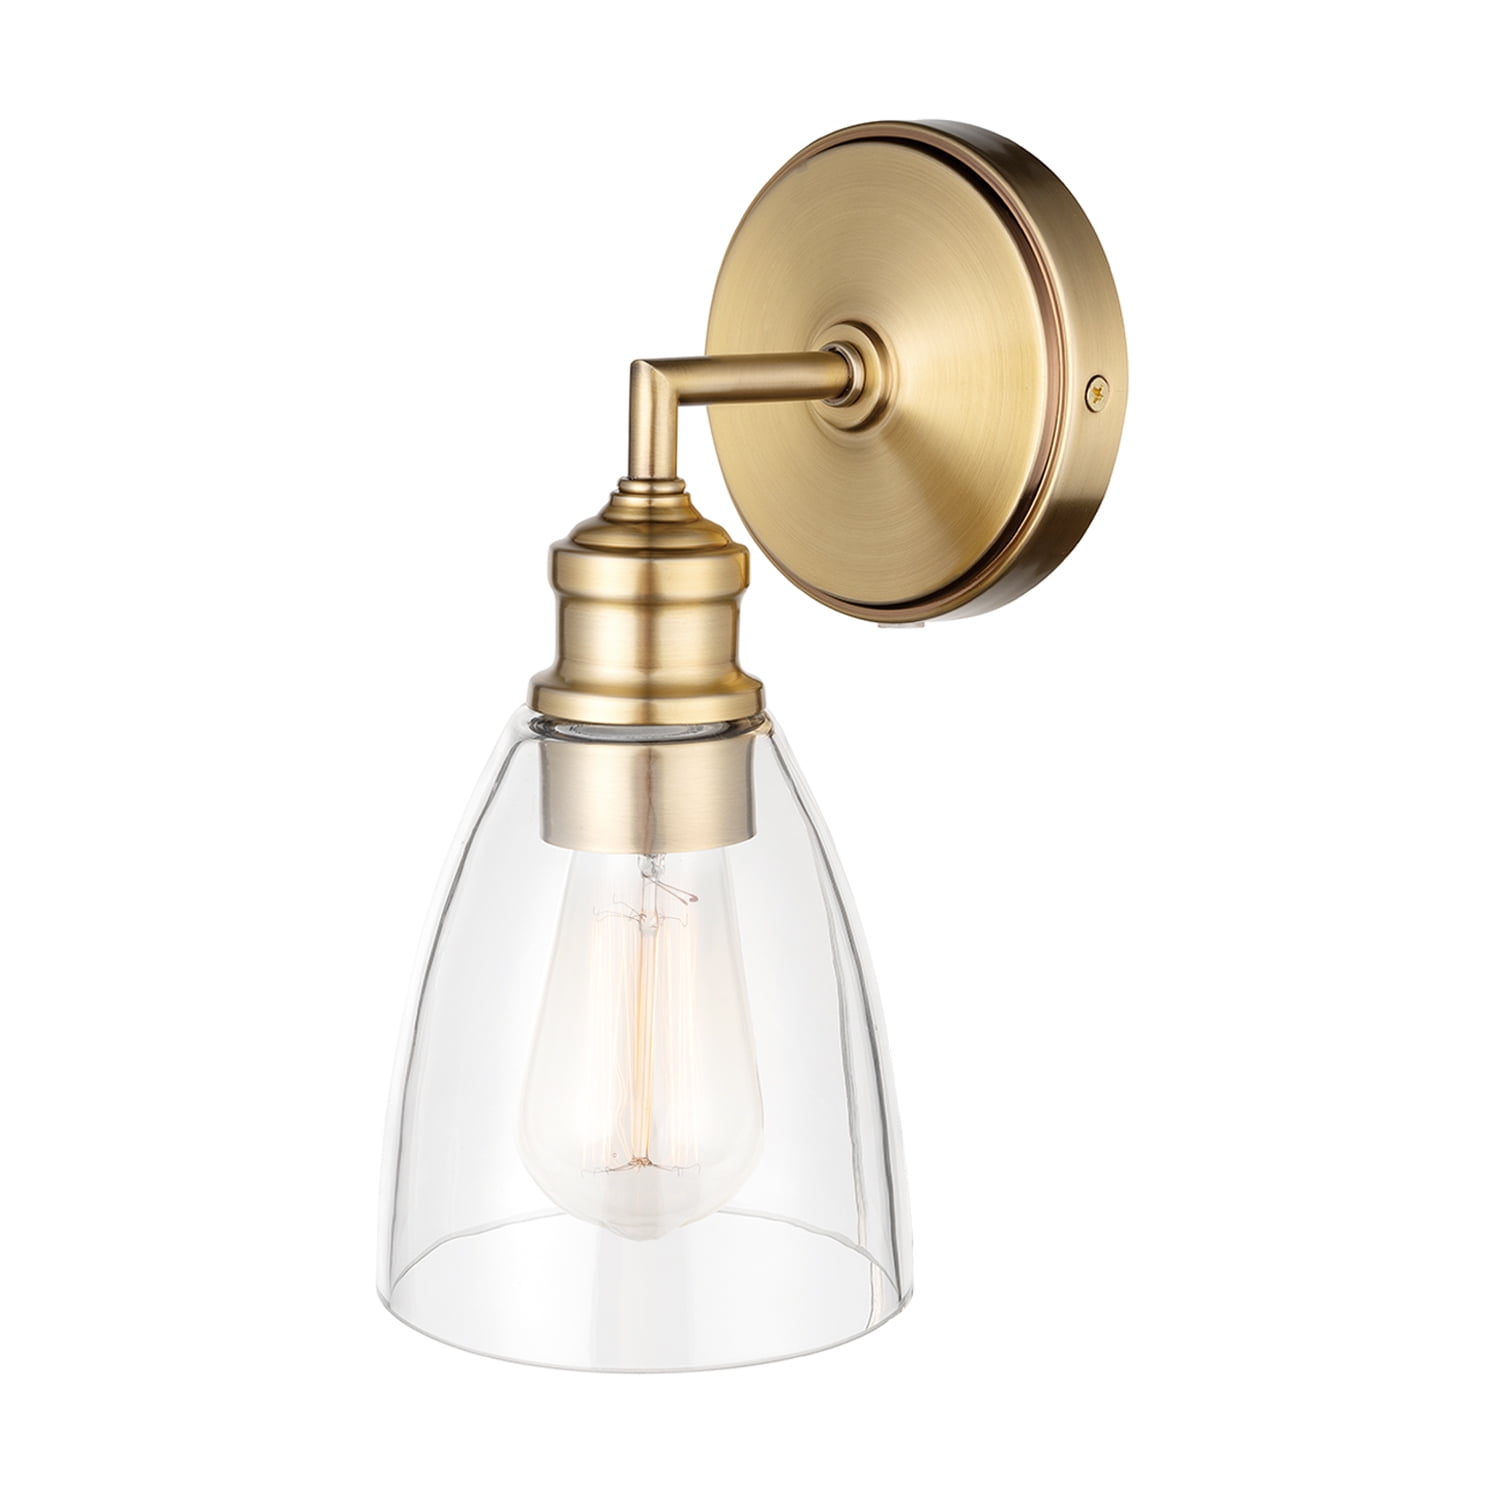 Harrow 1light Wall Sconce Matte Black Gold Accent Socket Clear Glass Shade 51367 for sale online 